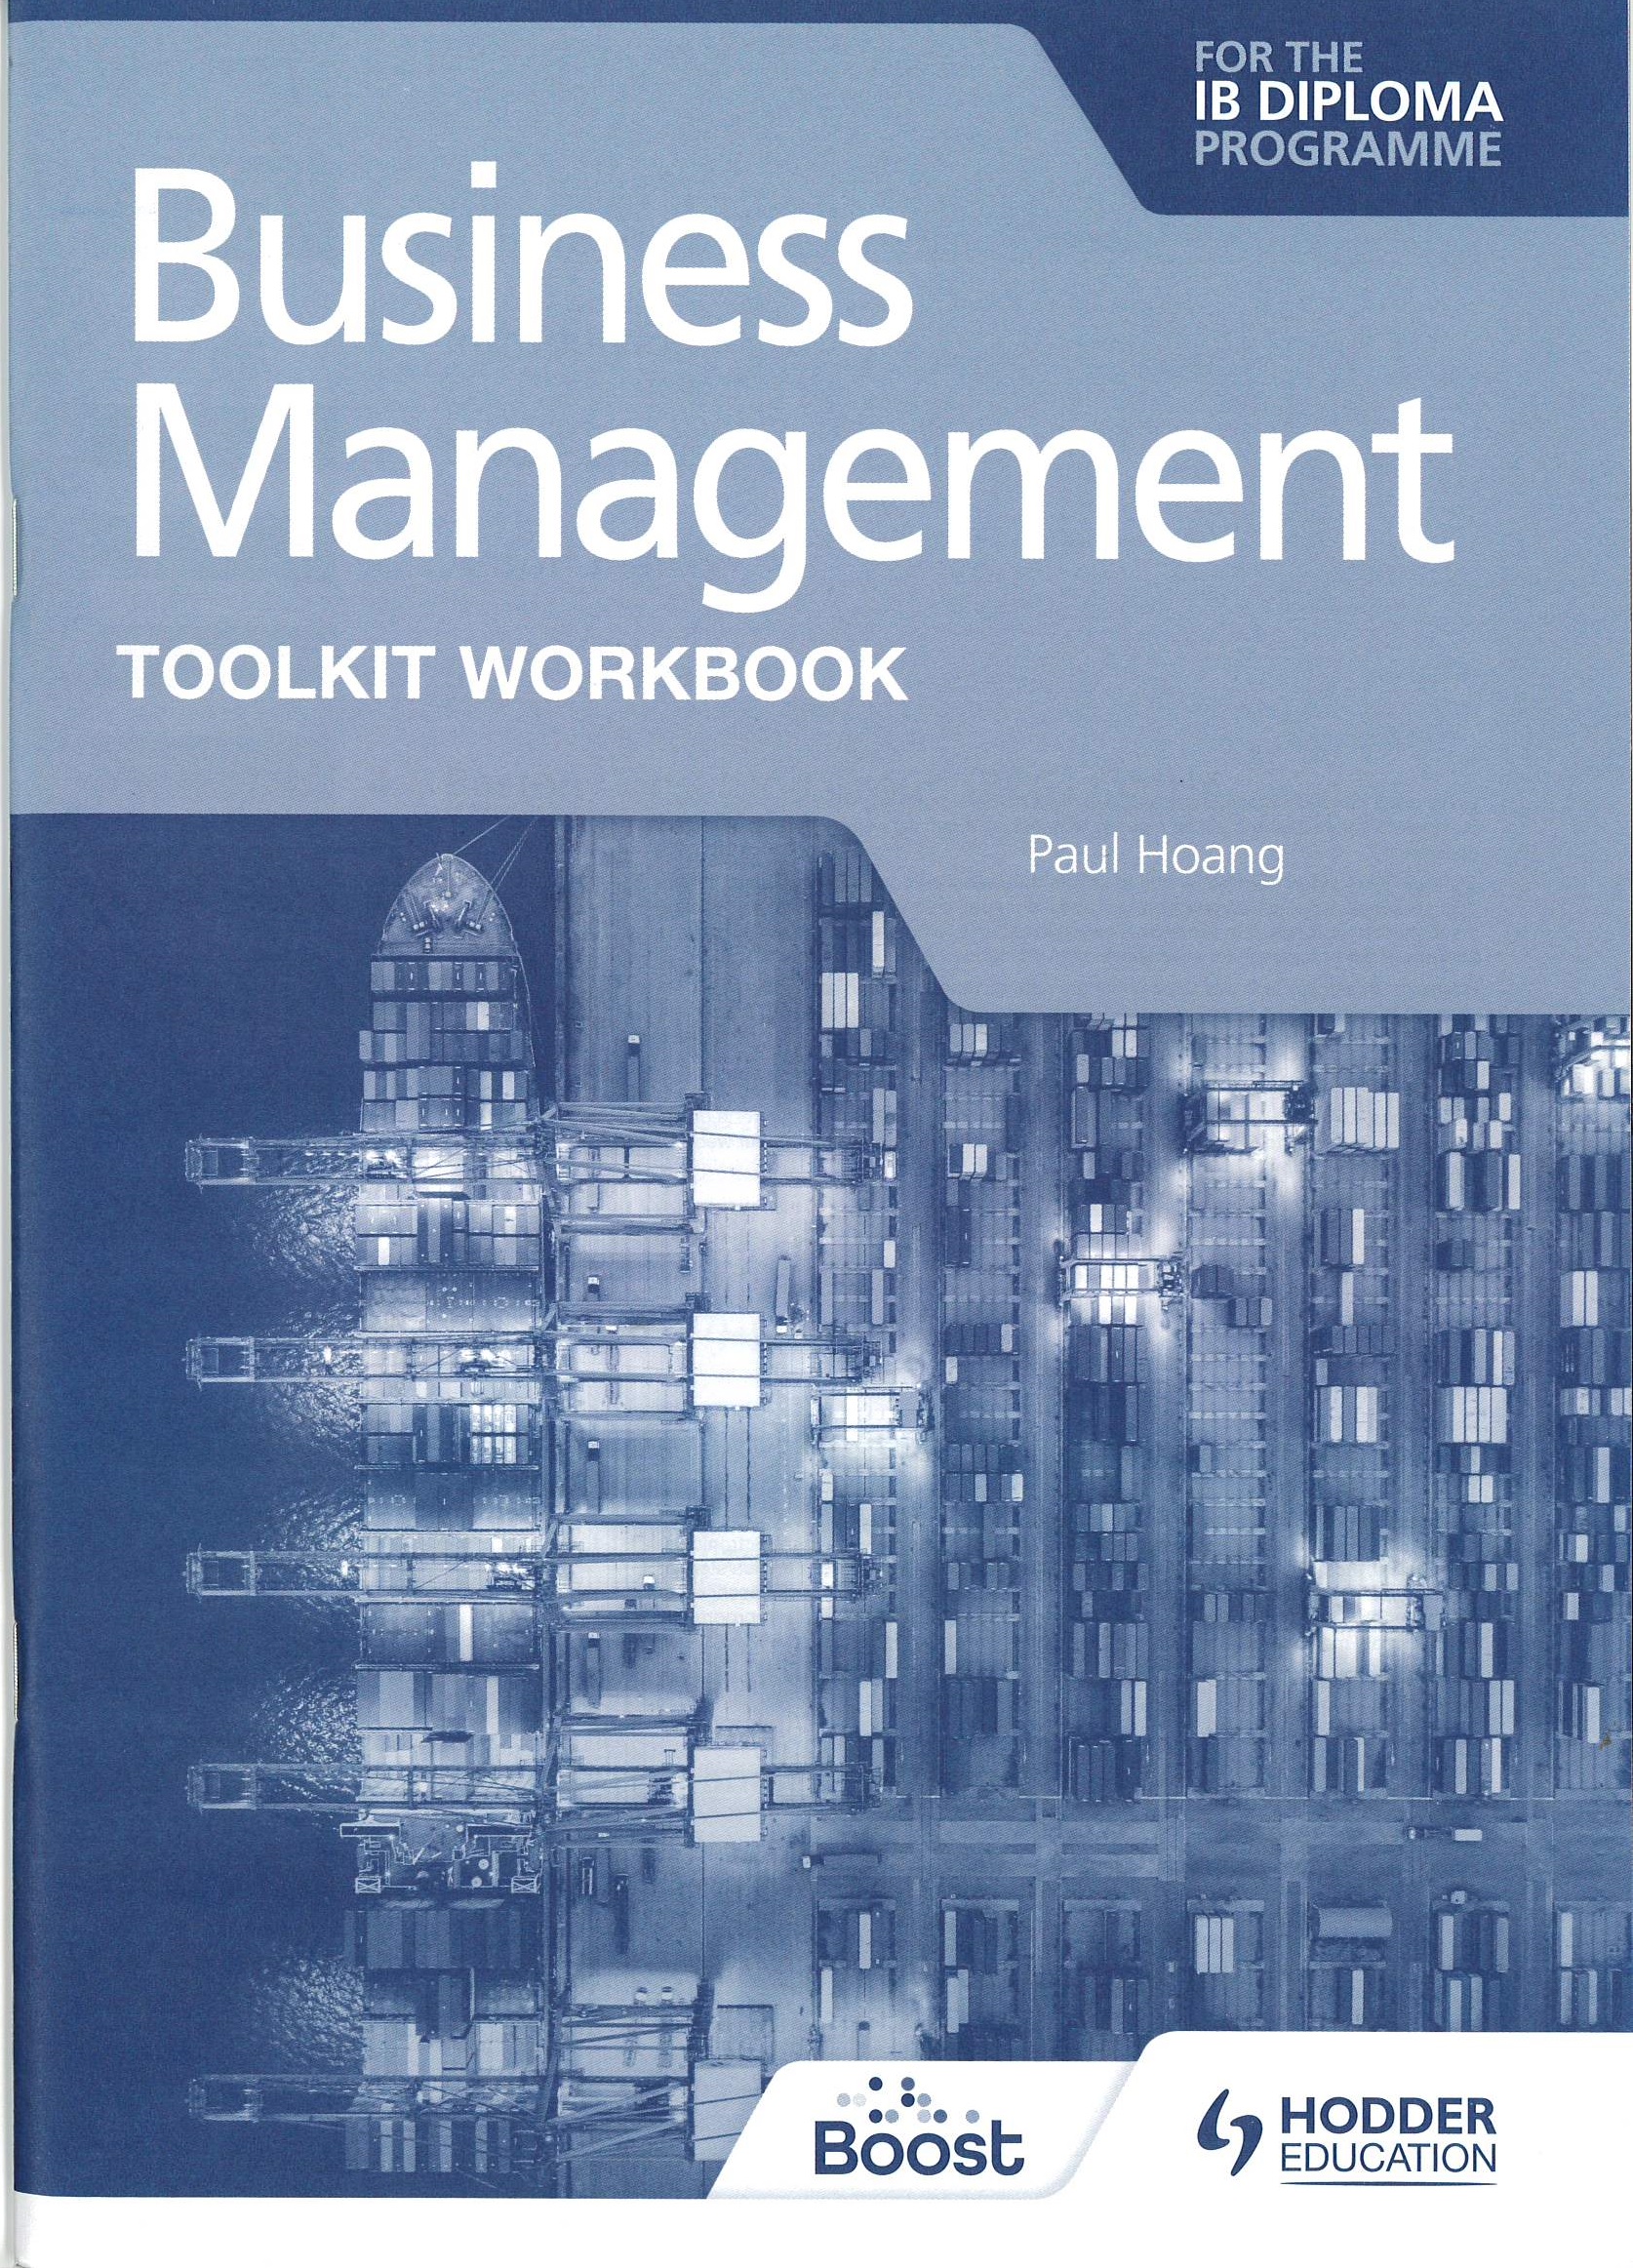 Business and management toolkit workbook for the IB diploma programme